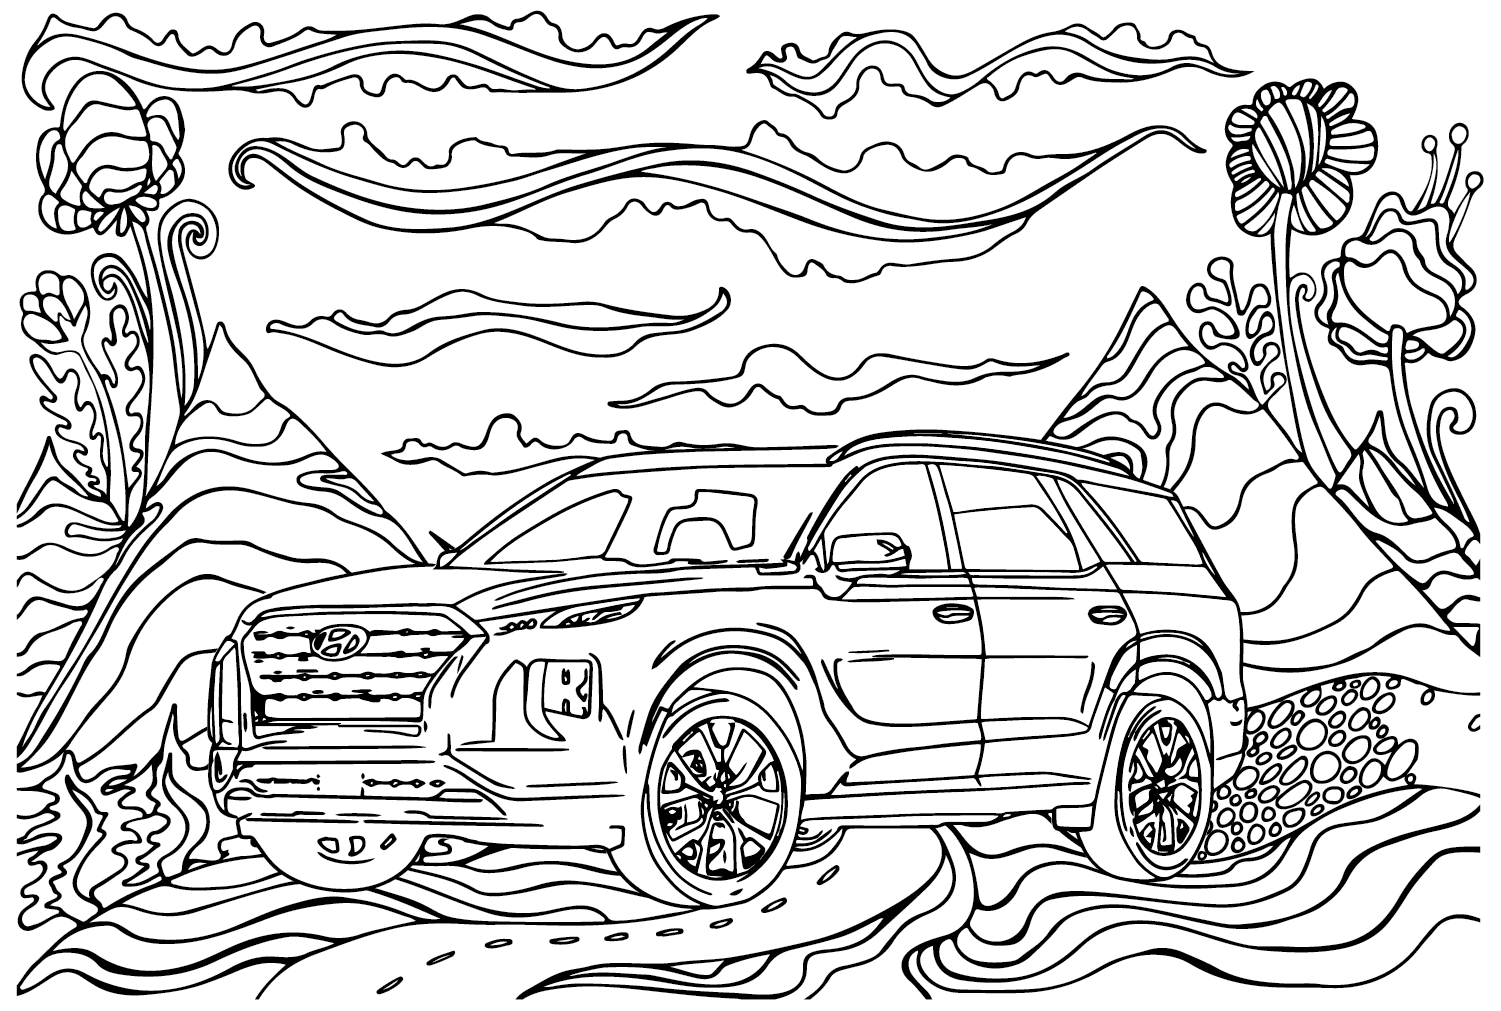 Hyundai Coloring Pages to Download - Free Printable Coloring Pages